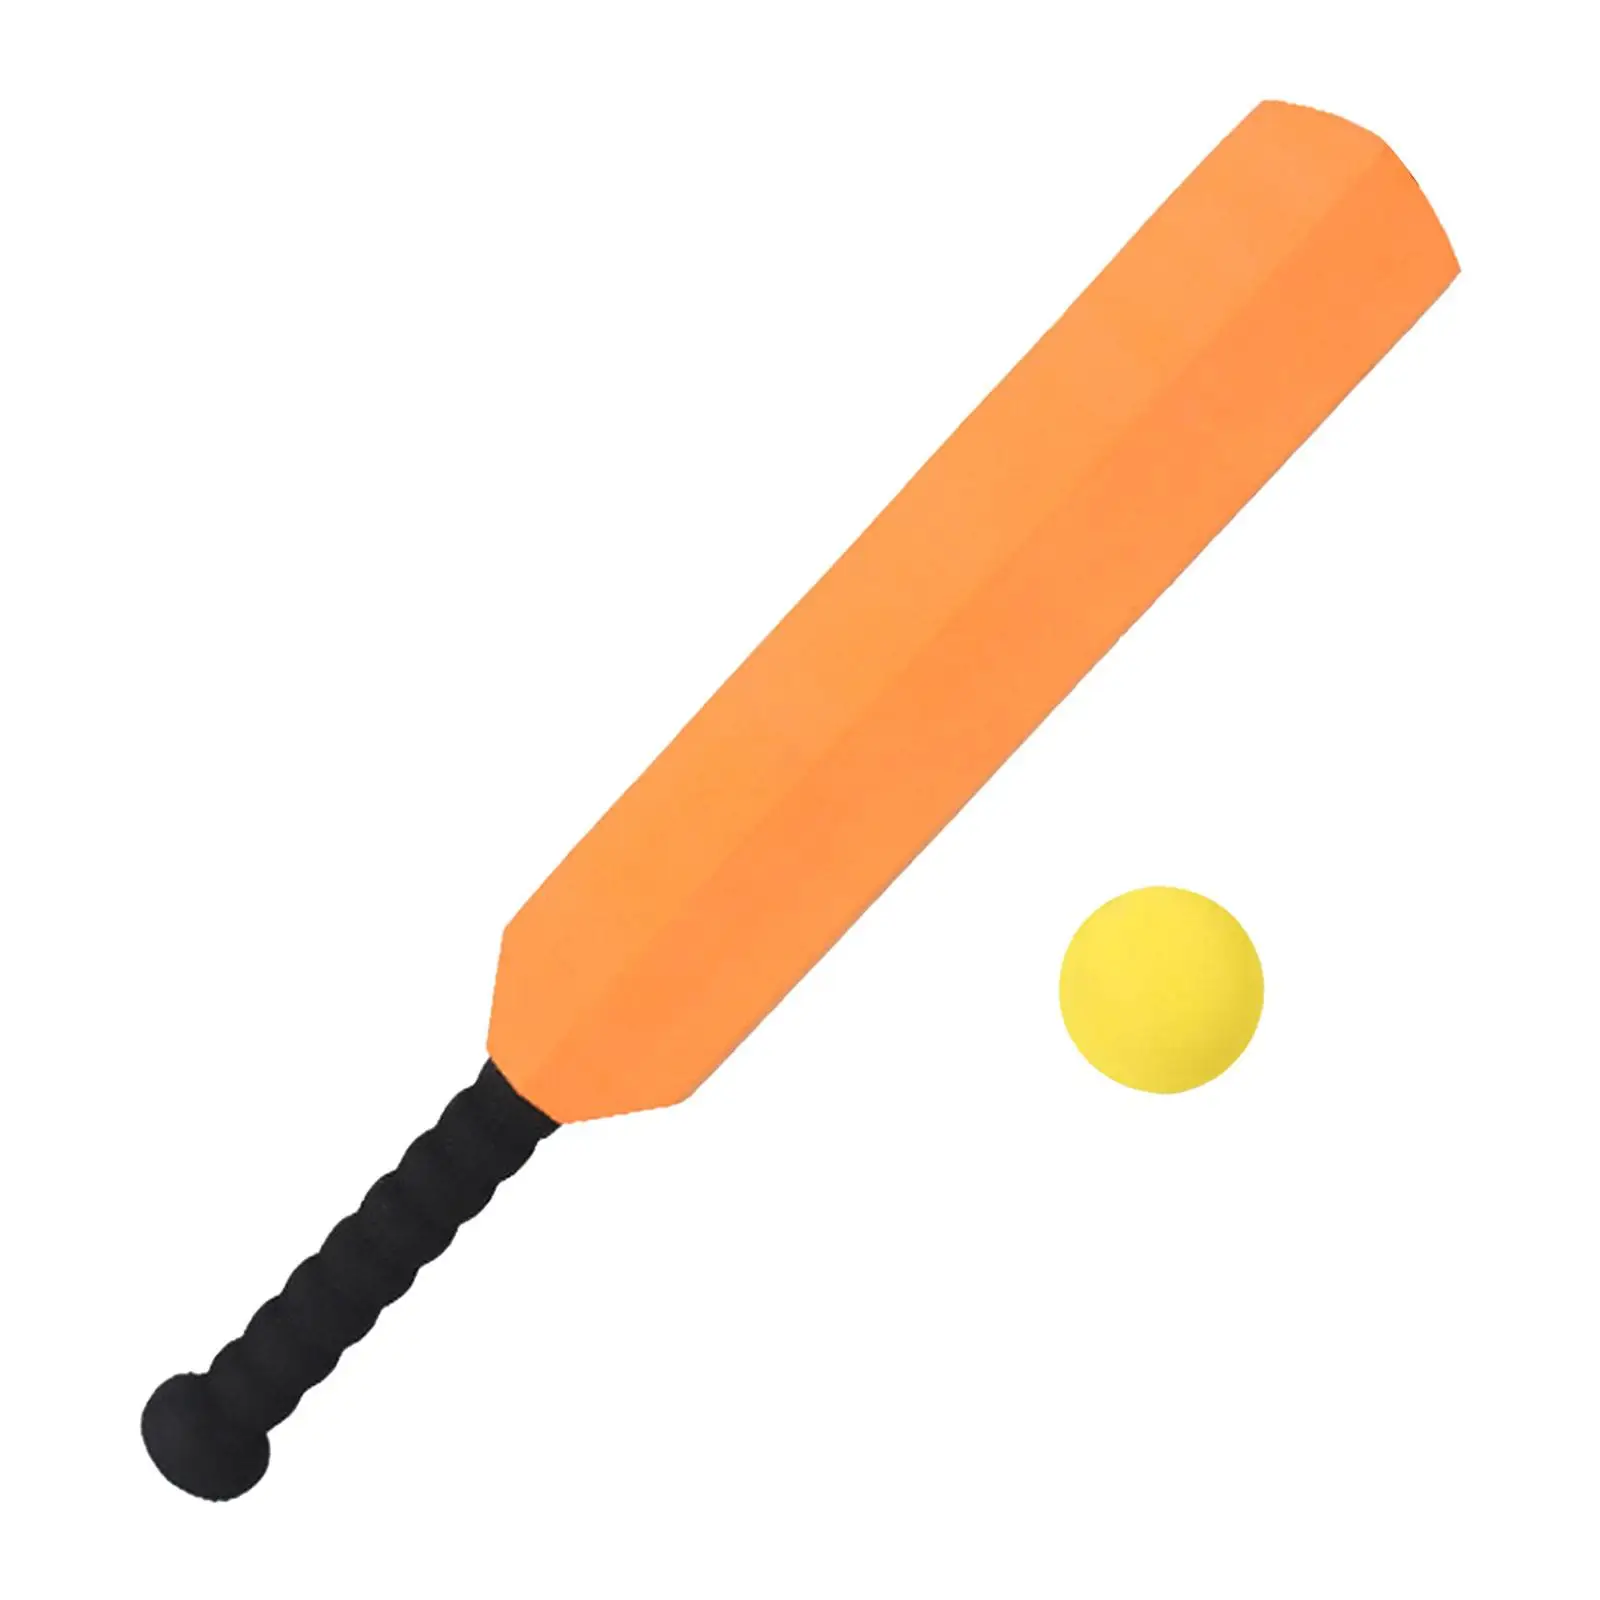 Cricket, Sport Toy, Set, Professional Training Aid, Game, for Indoor, Outside Play, Kids, Interactive Toys